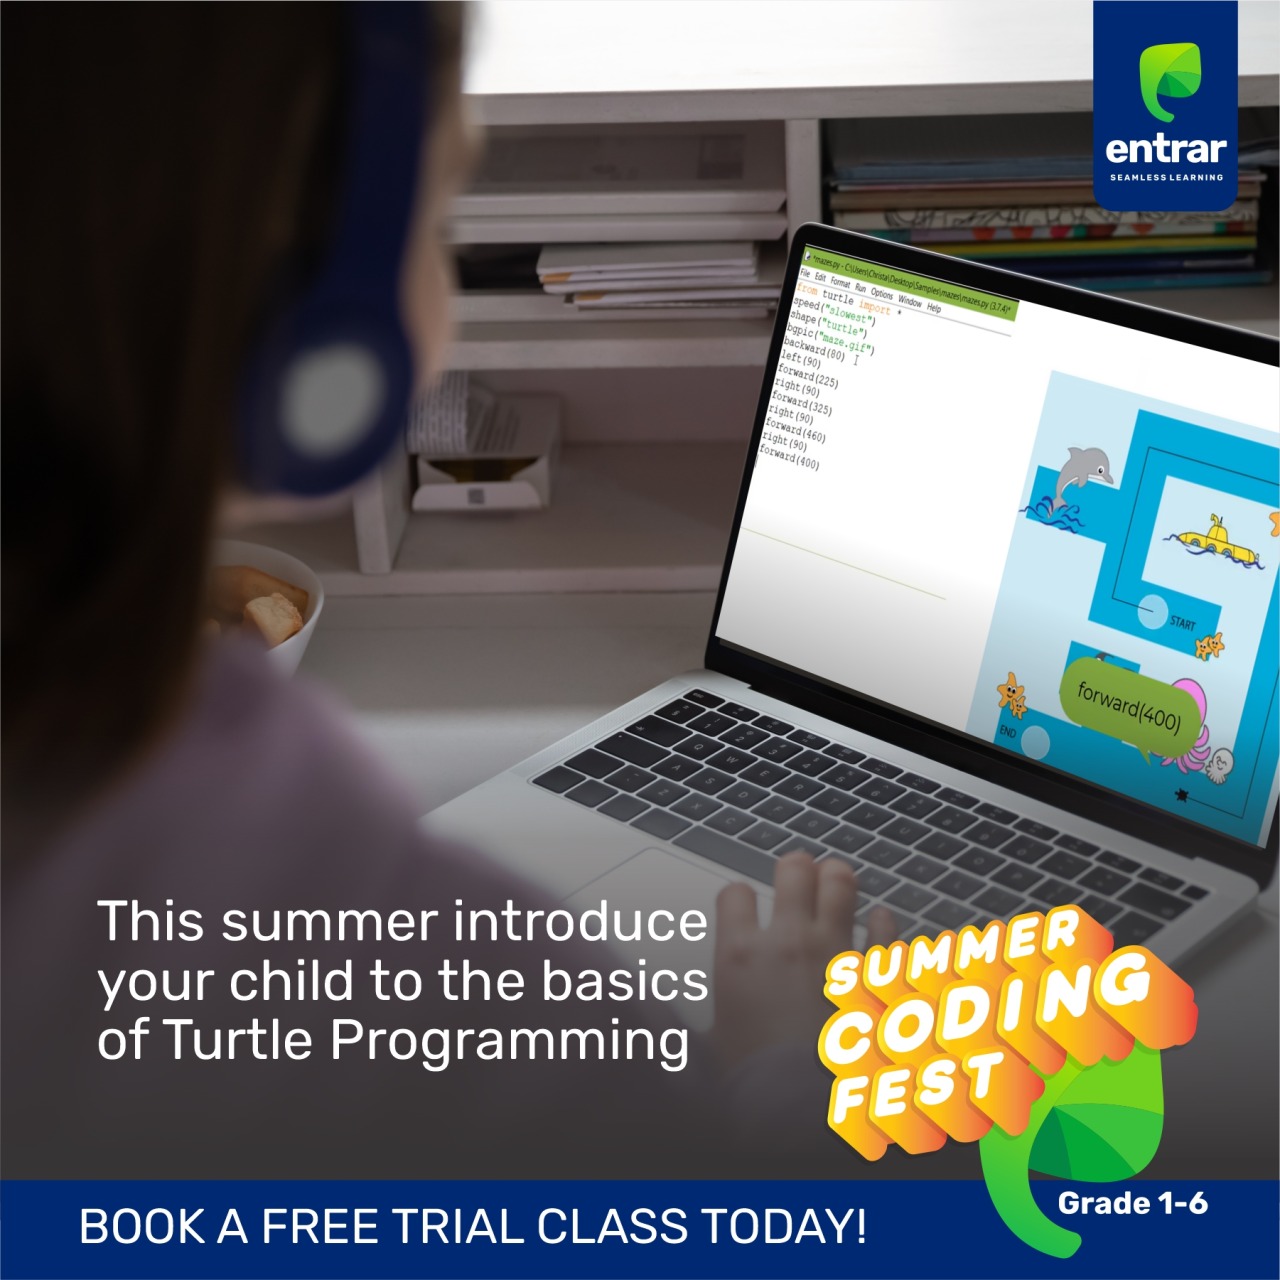 Summer Coding Fest - Make you child to learn basics of turtle programming Book a Free Demo Class Now : https://ow.ly/vw3B50J75xQ Call us at: 73490 73494 #codingforkids kidscoding kidsprogramming summercodingfest entrar